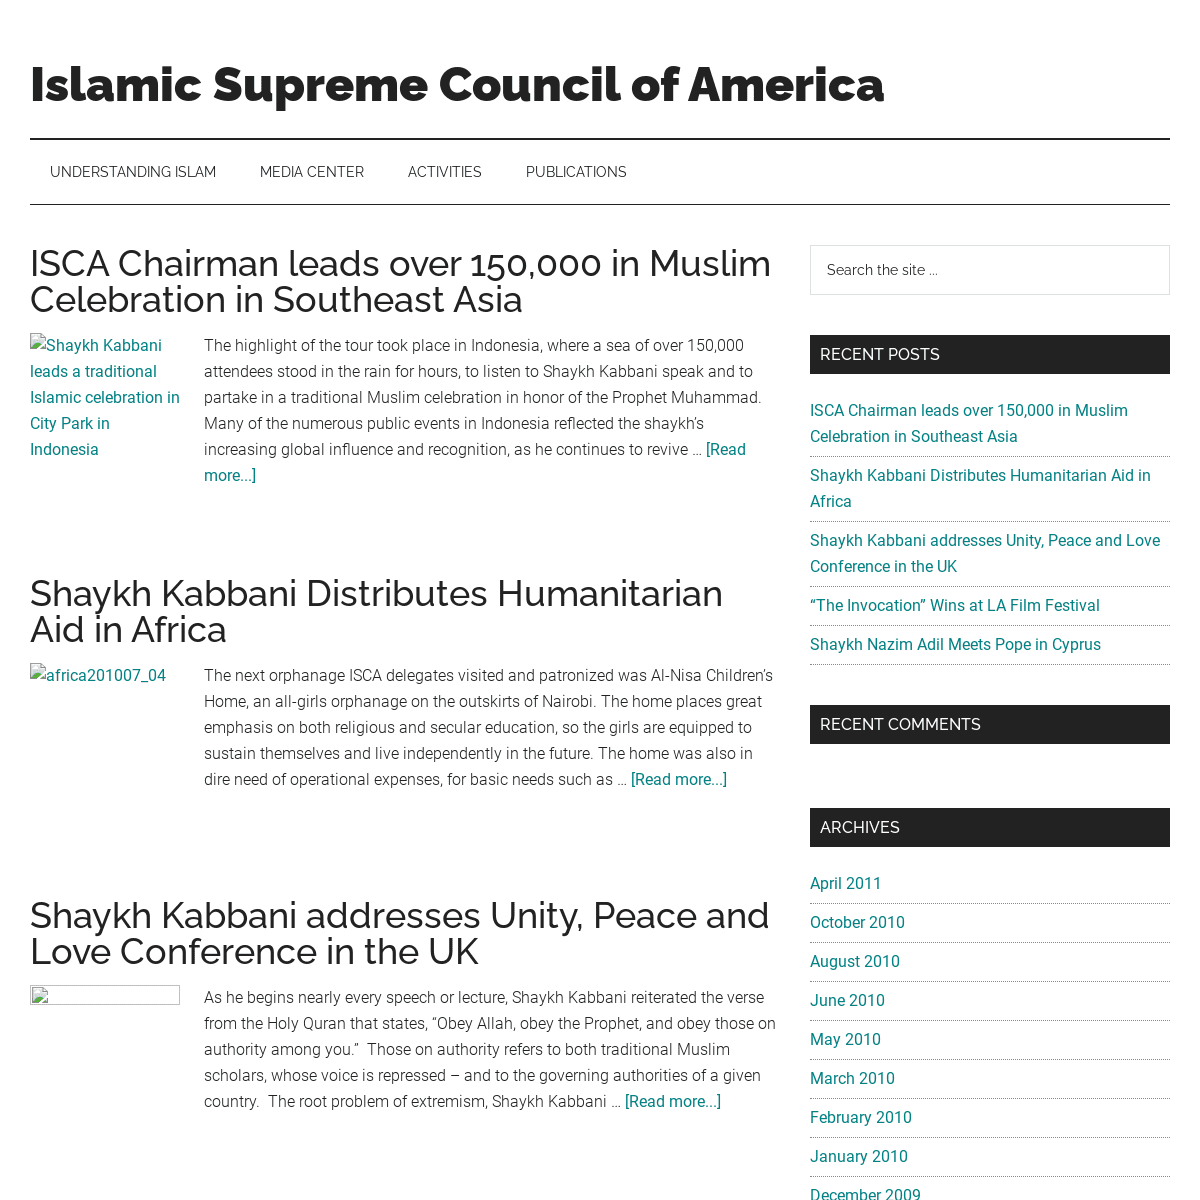 A complete backup of https://islamicsupremecouncil.org